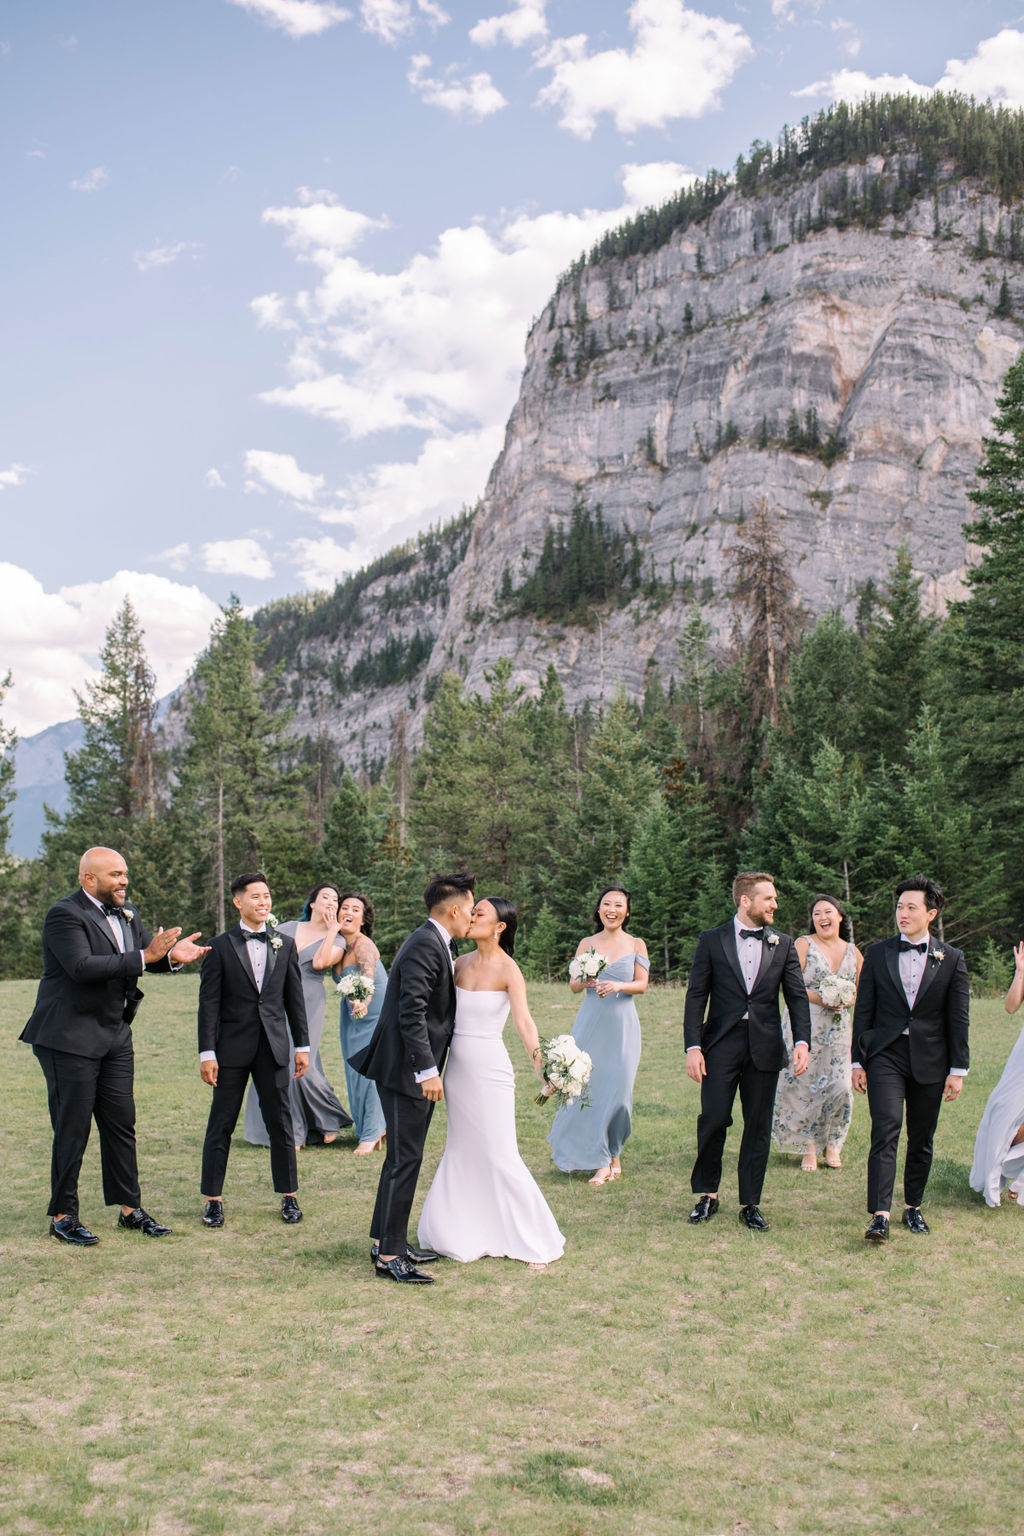 Wedding party walking together in the mountains of Banff, Alberta, Canada. Elegant summer wedding inspiration, Classic neutral, blush, cremes, dusty blue colour scheme, white rose bouquets.